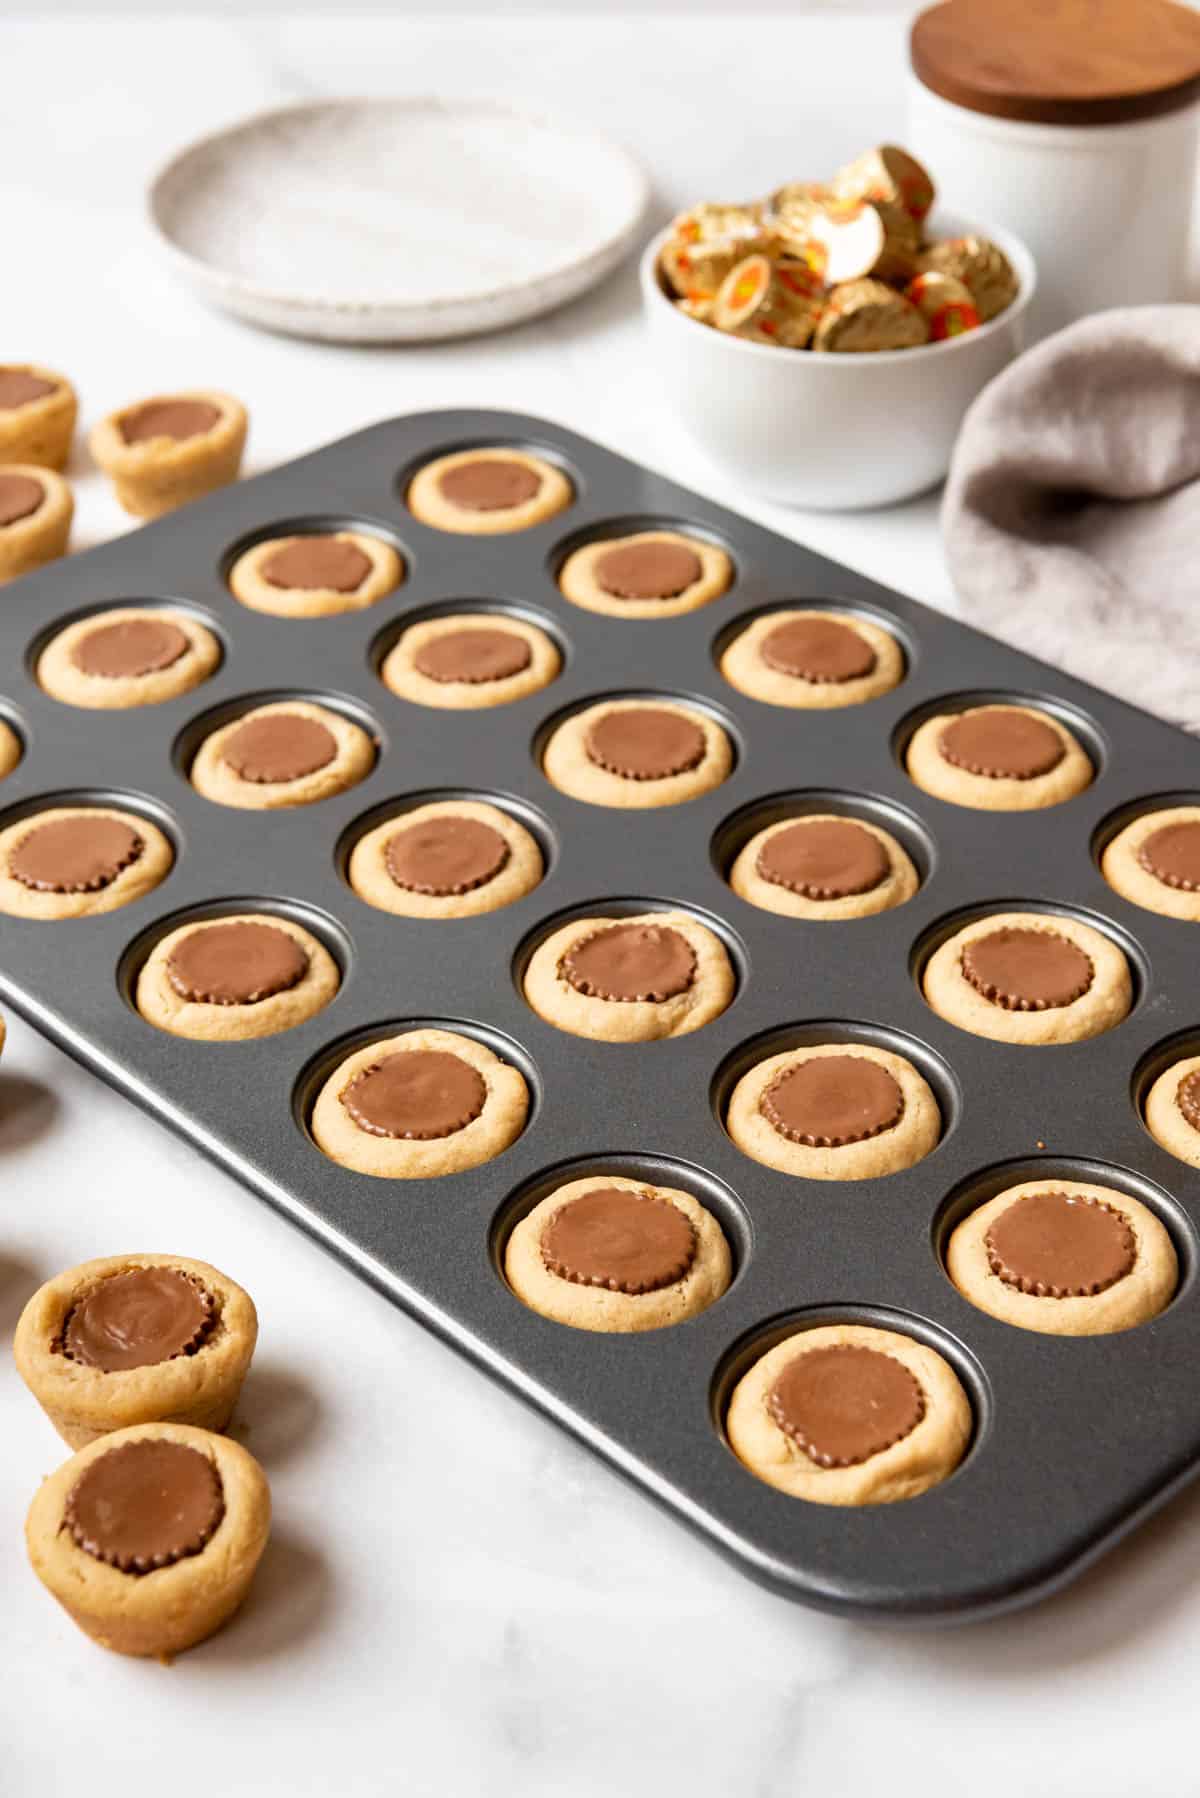 A tray of peanut butter cup cookies made with mini Reese's peanut butter cups.